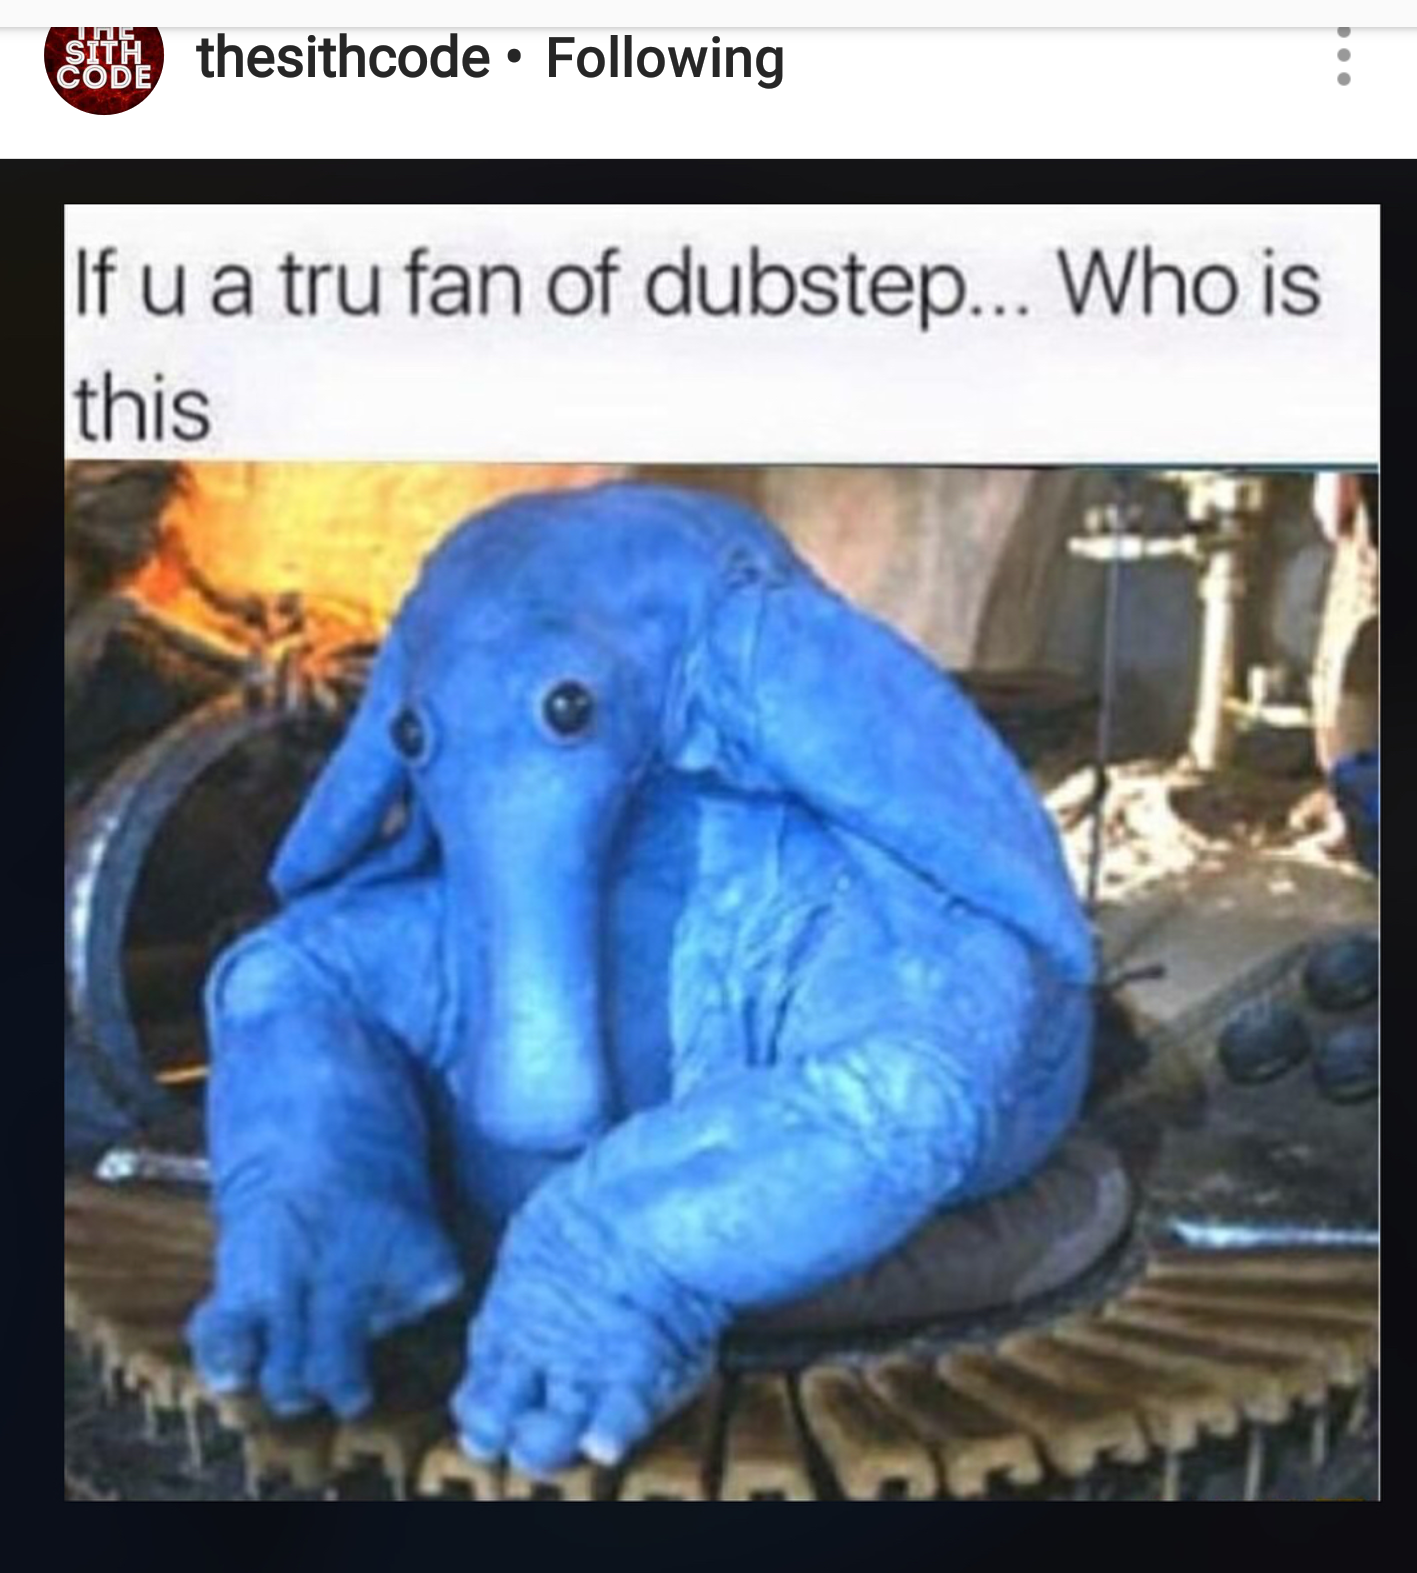 max rebo - El thesithcode . ing If u a tru fan of dubstep... Who is this